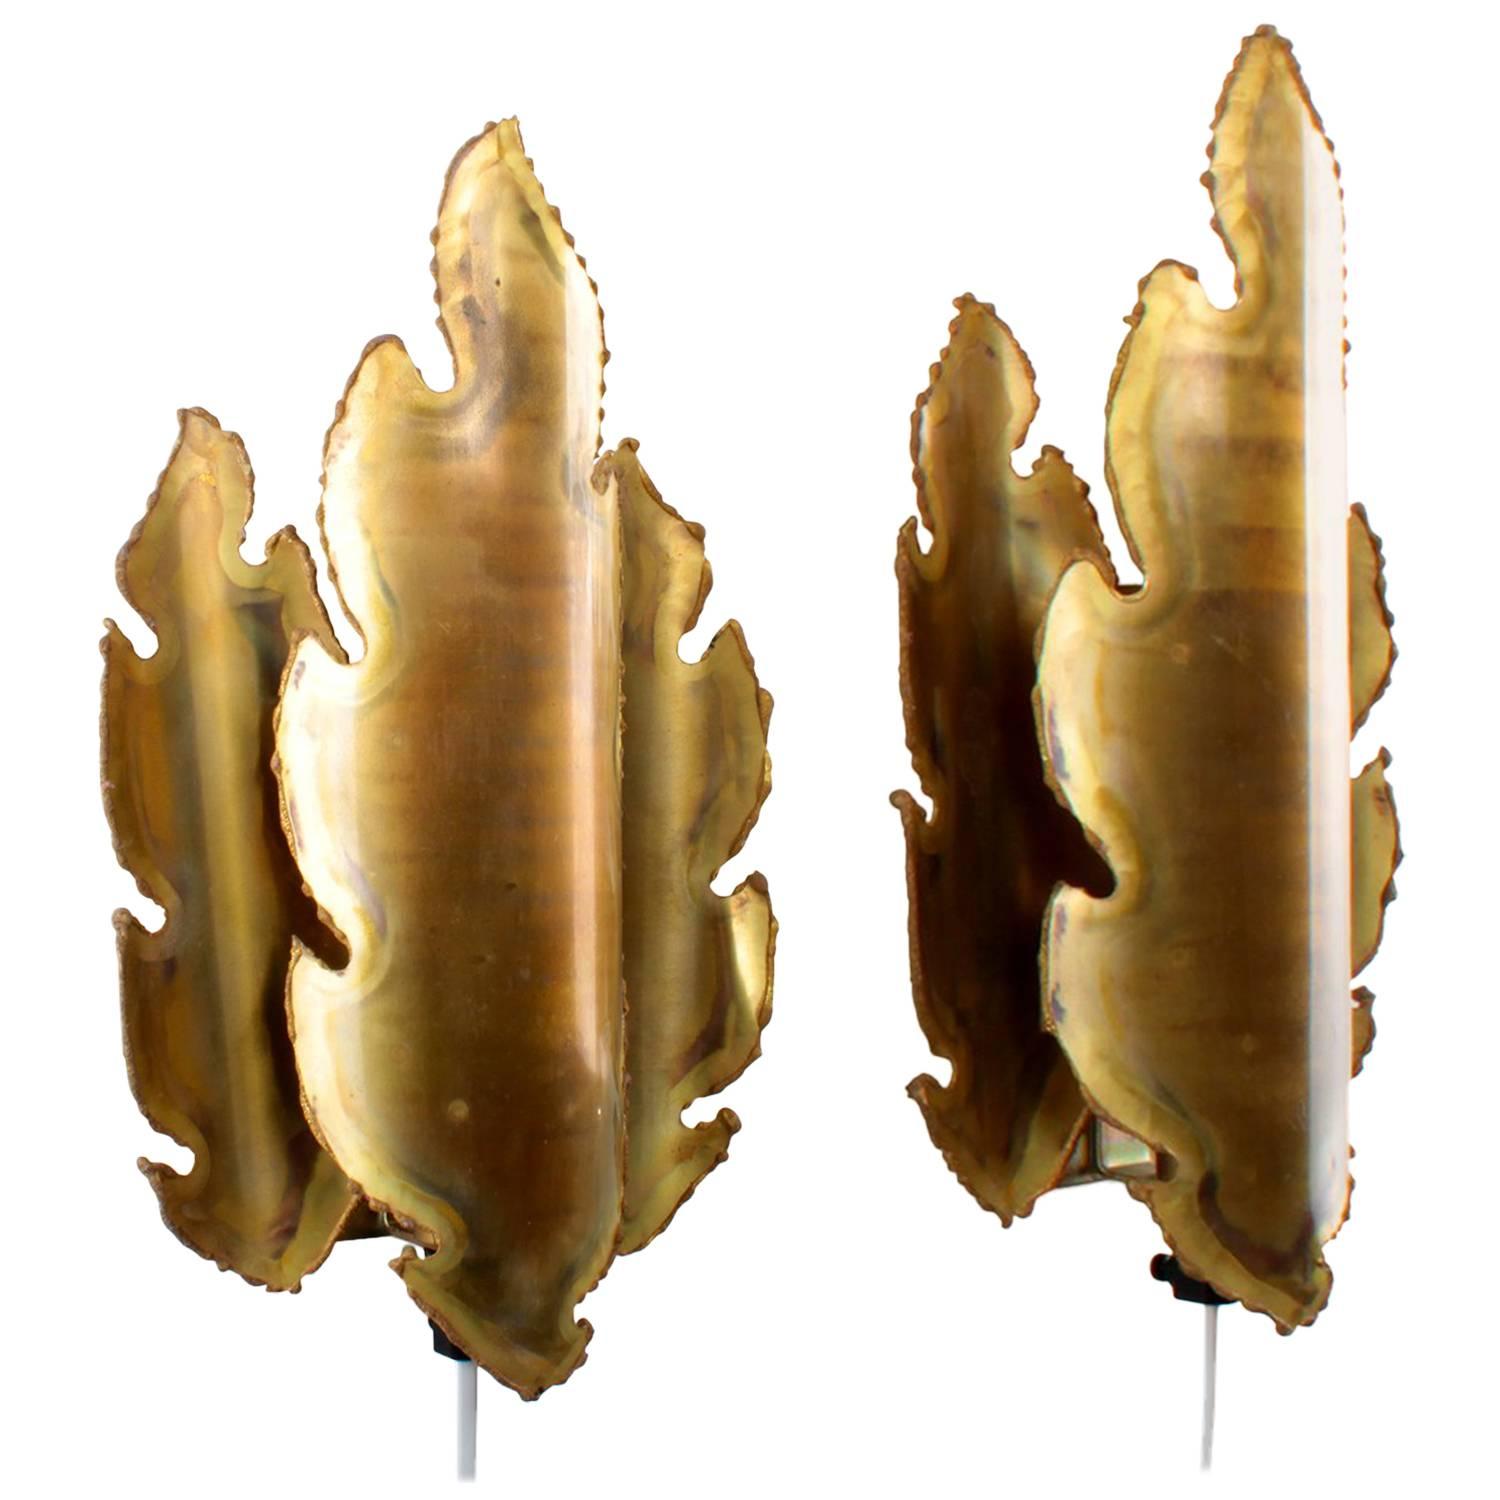 Brass Sconces Pair, by Holm Sorensen, 1960s, Brutalist Style Brass Wall Lamps